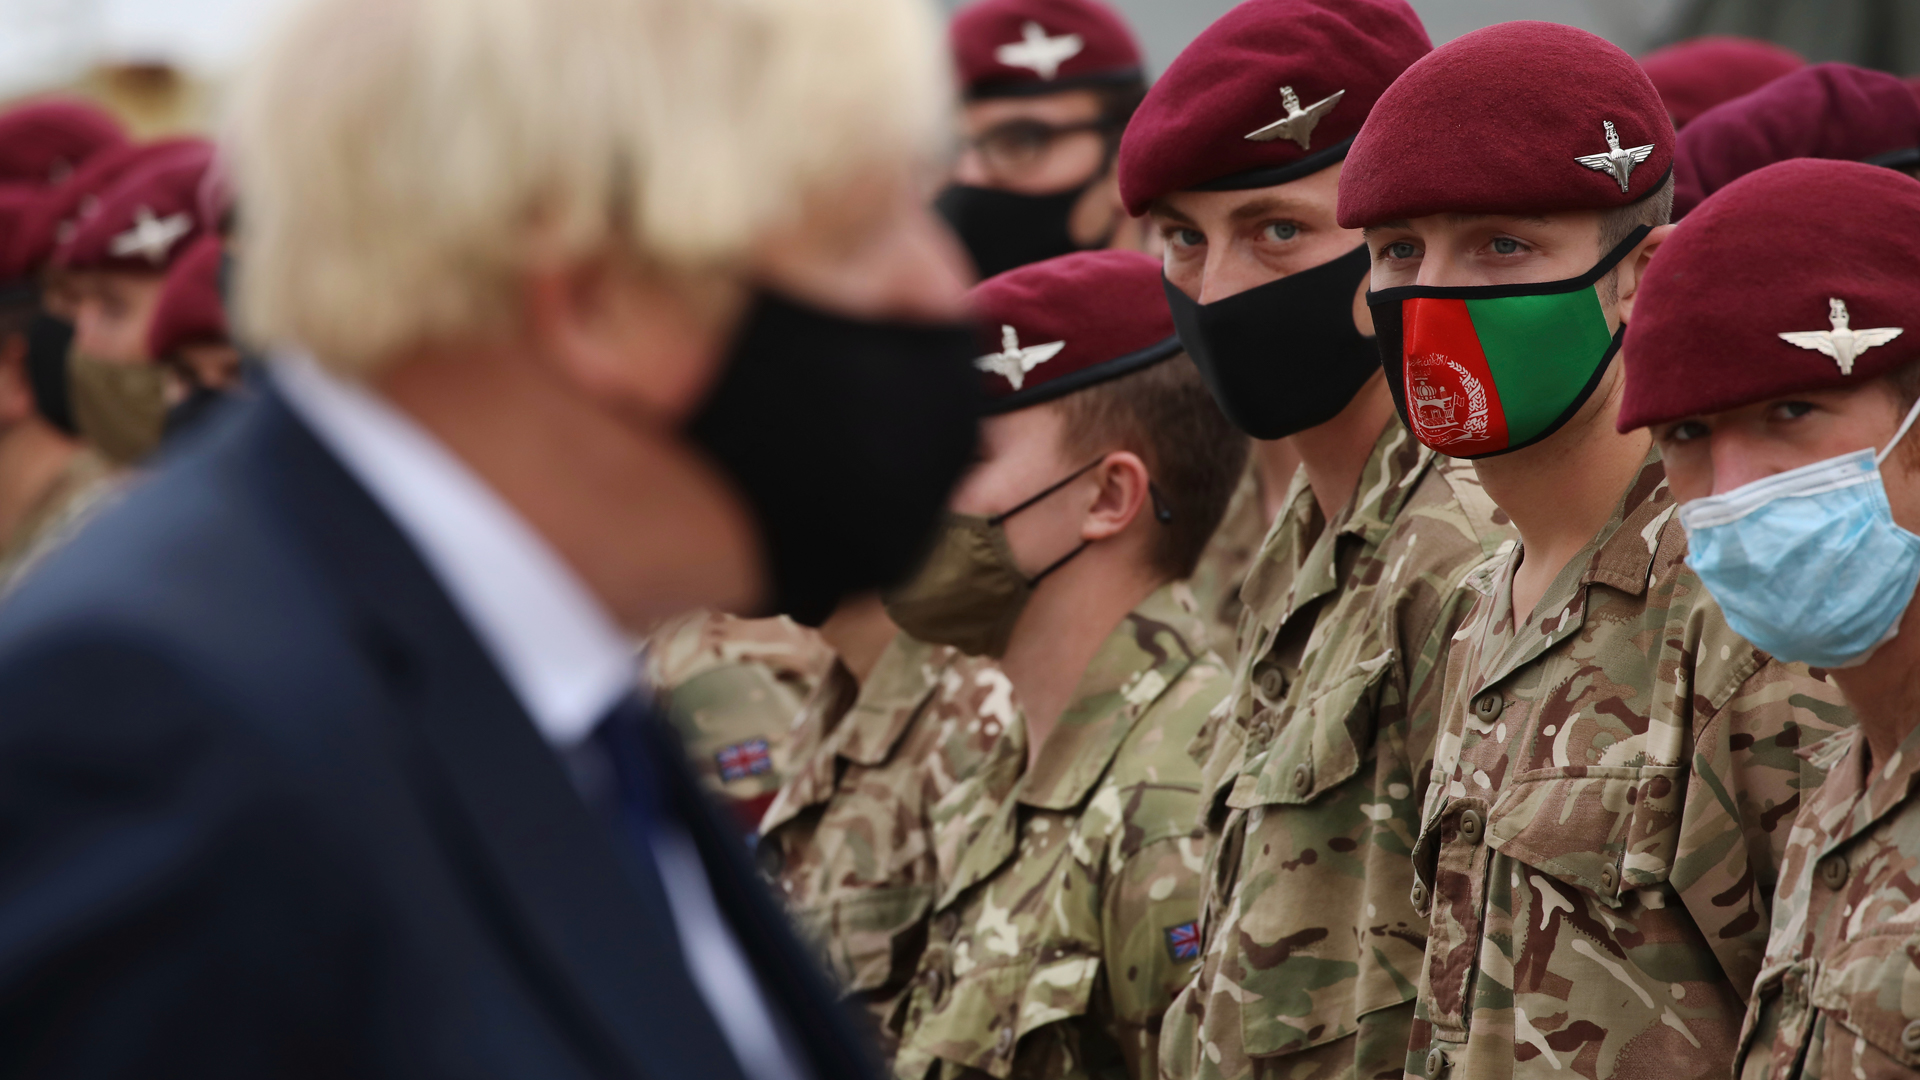 British Army paratroopers barred from military exercise over barracks orgy